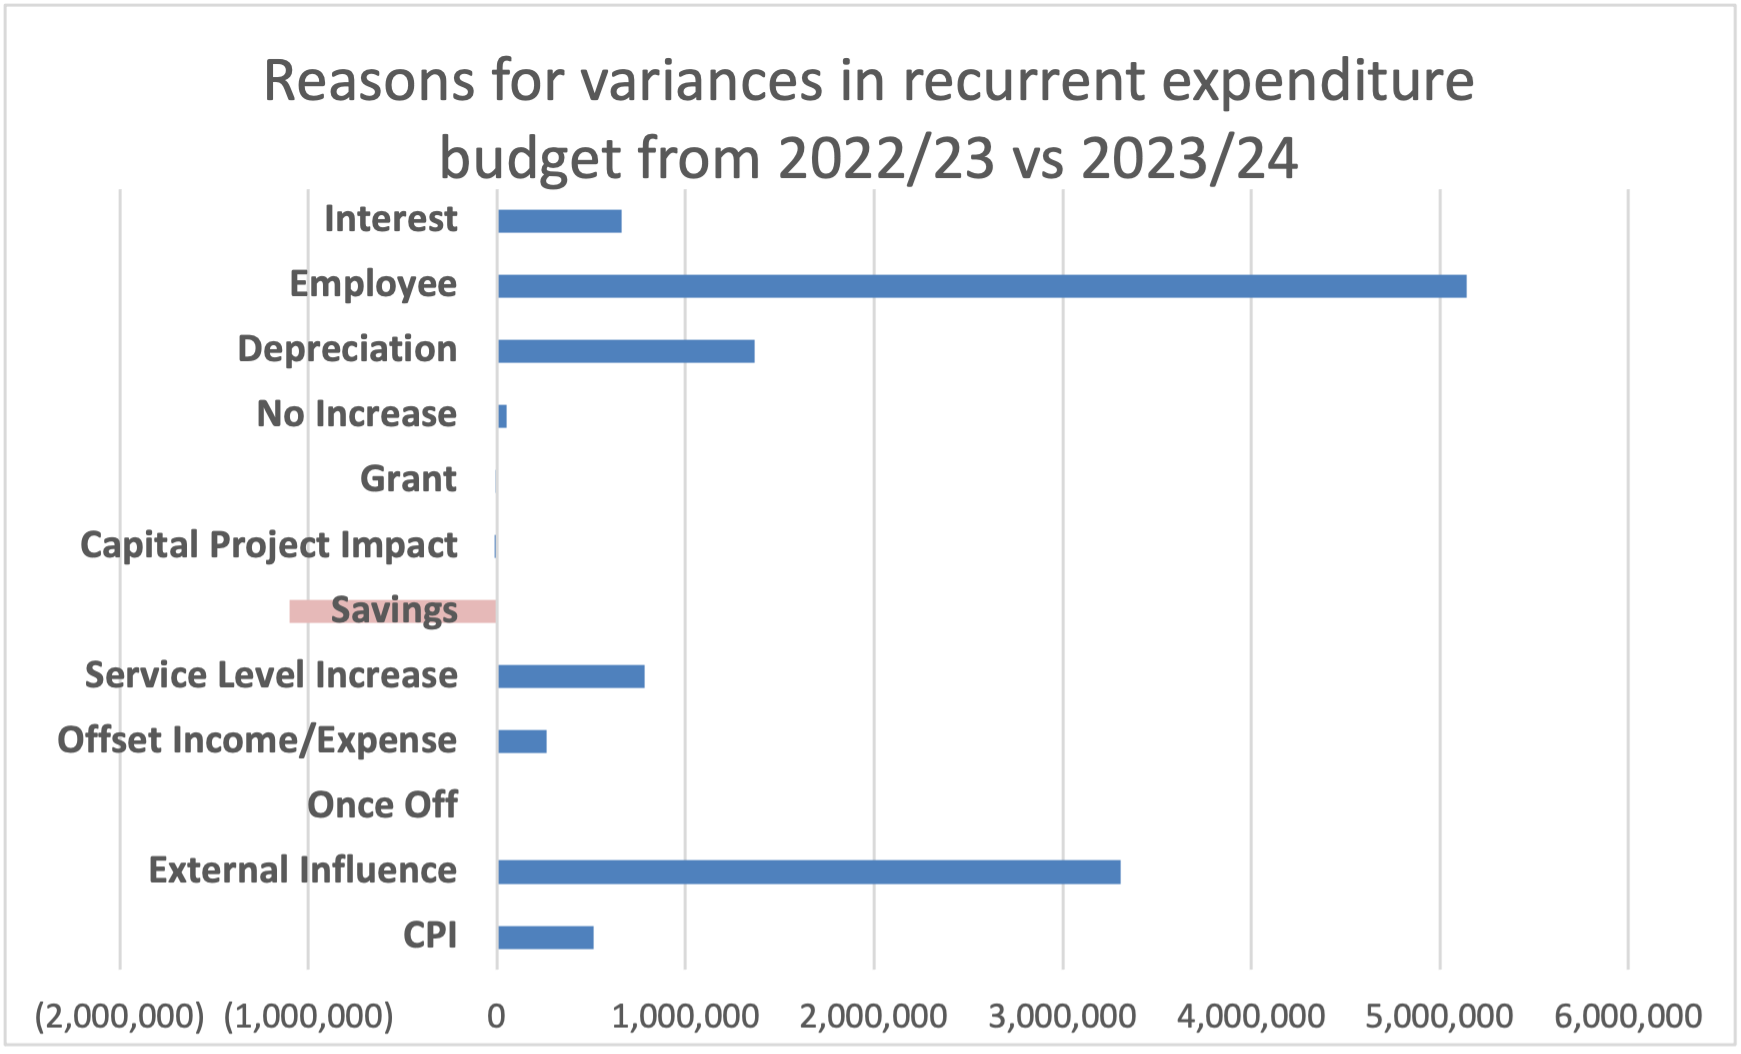 Reasons for Variances in Expenditure 2022-23 vs 2023-24